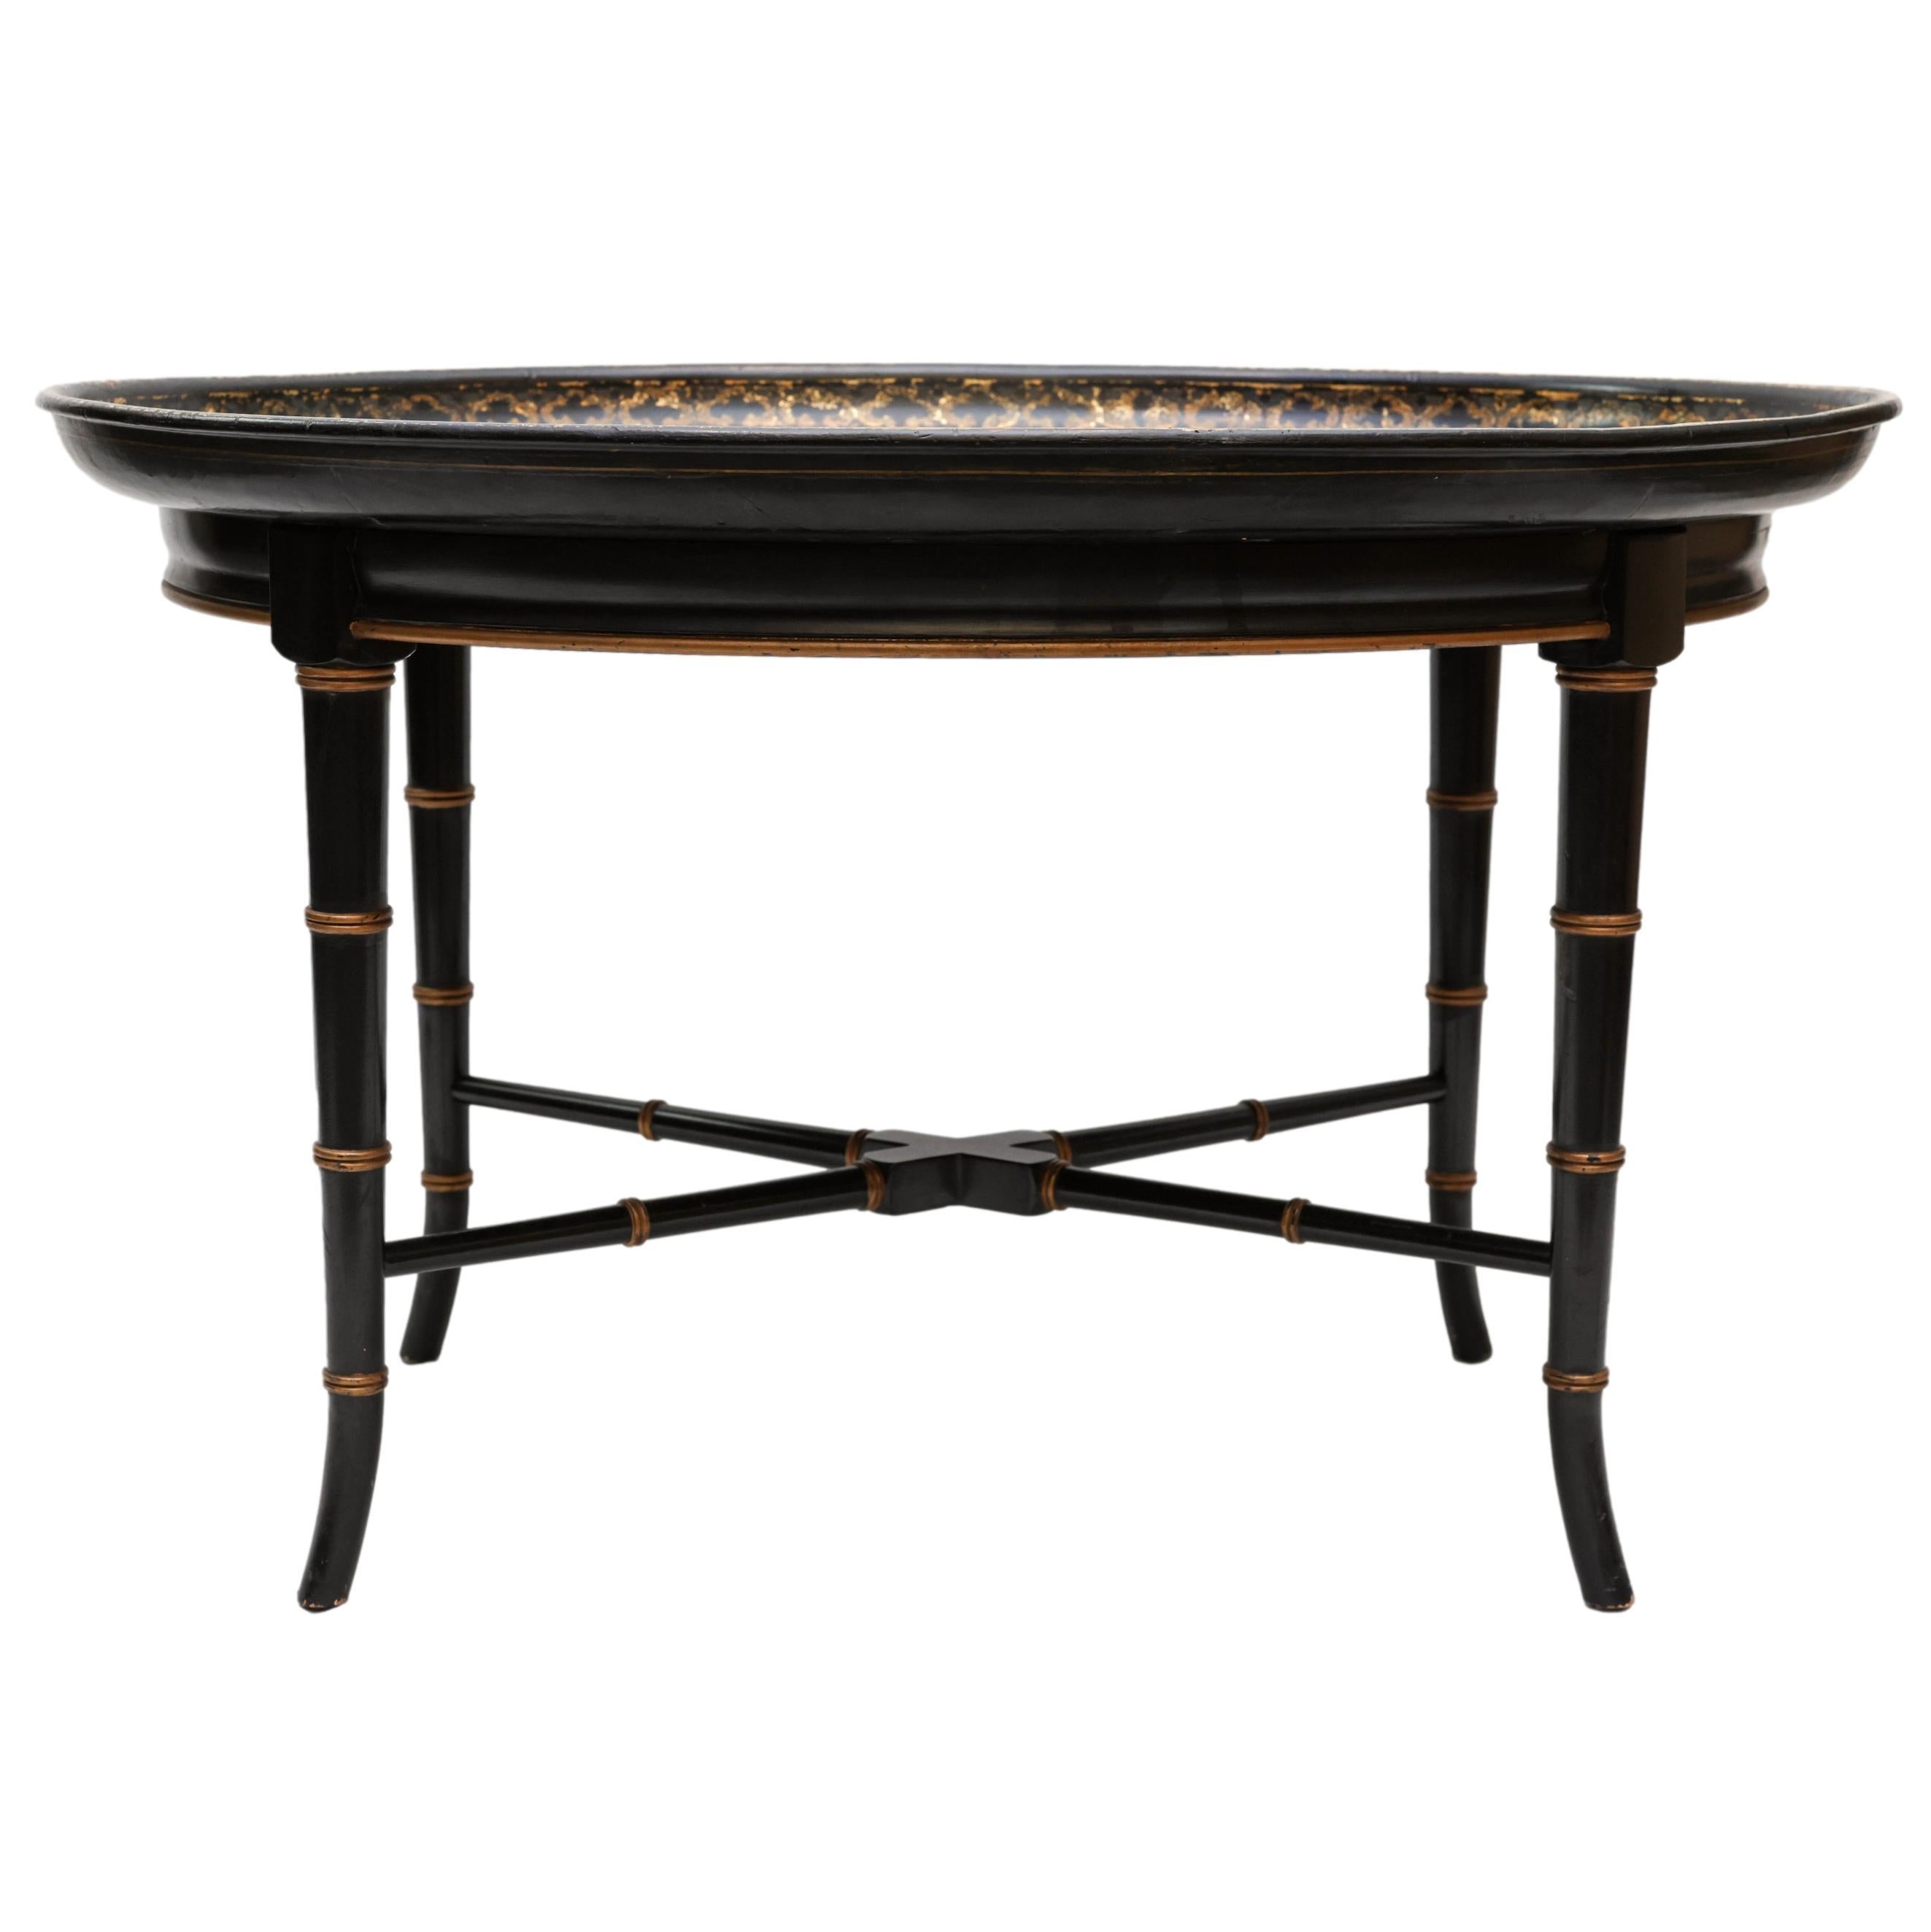 Victorian Mother-of-Pearl Inlaid and Ebonized Paper Mache Tray Table, English, ca. 1850 For Sale